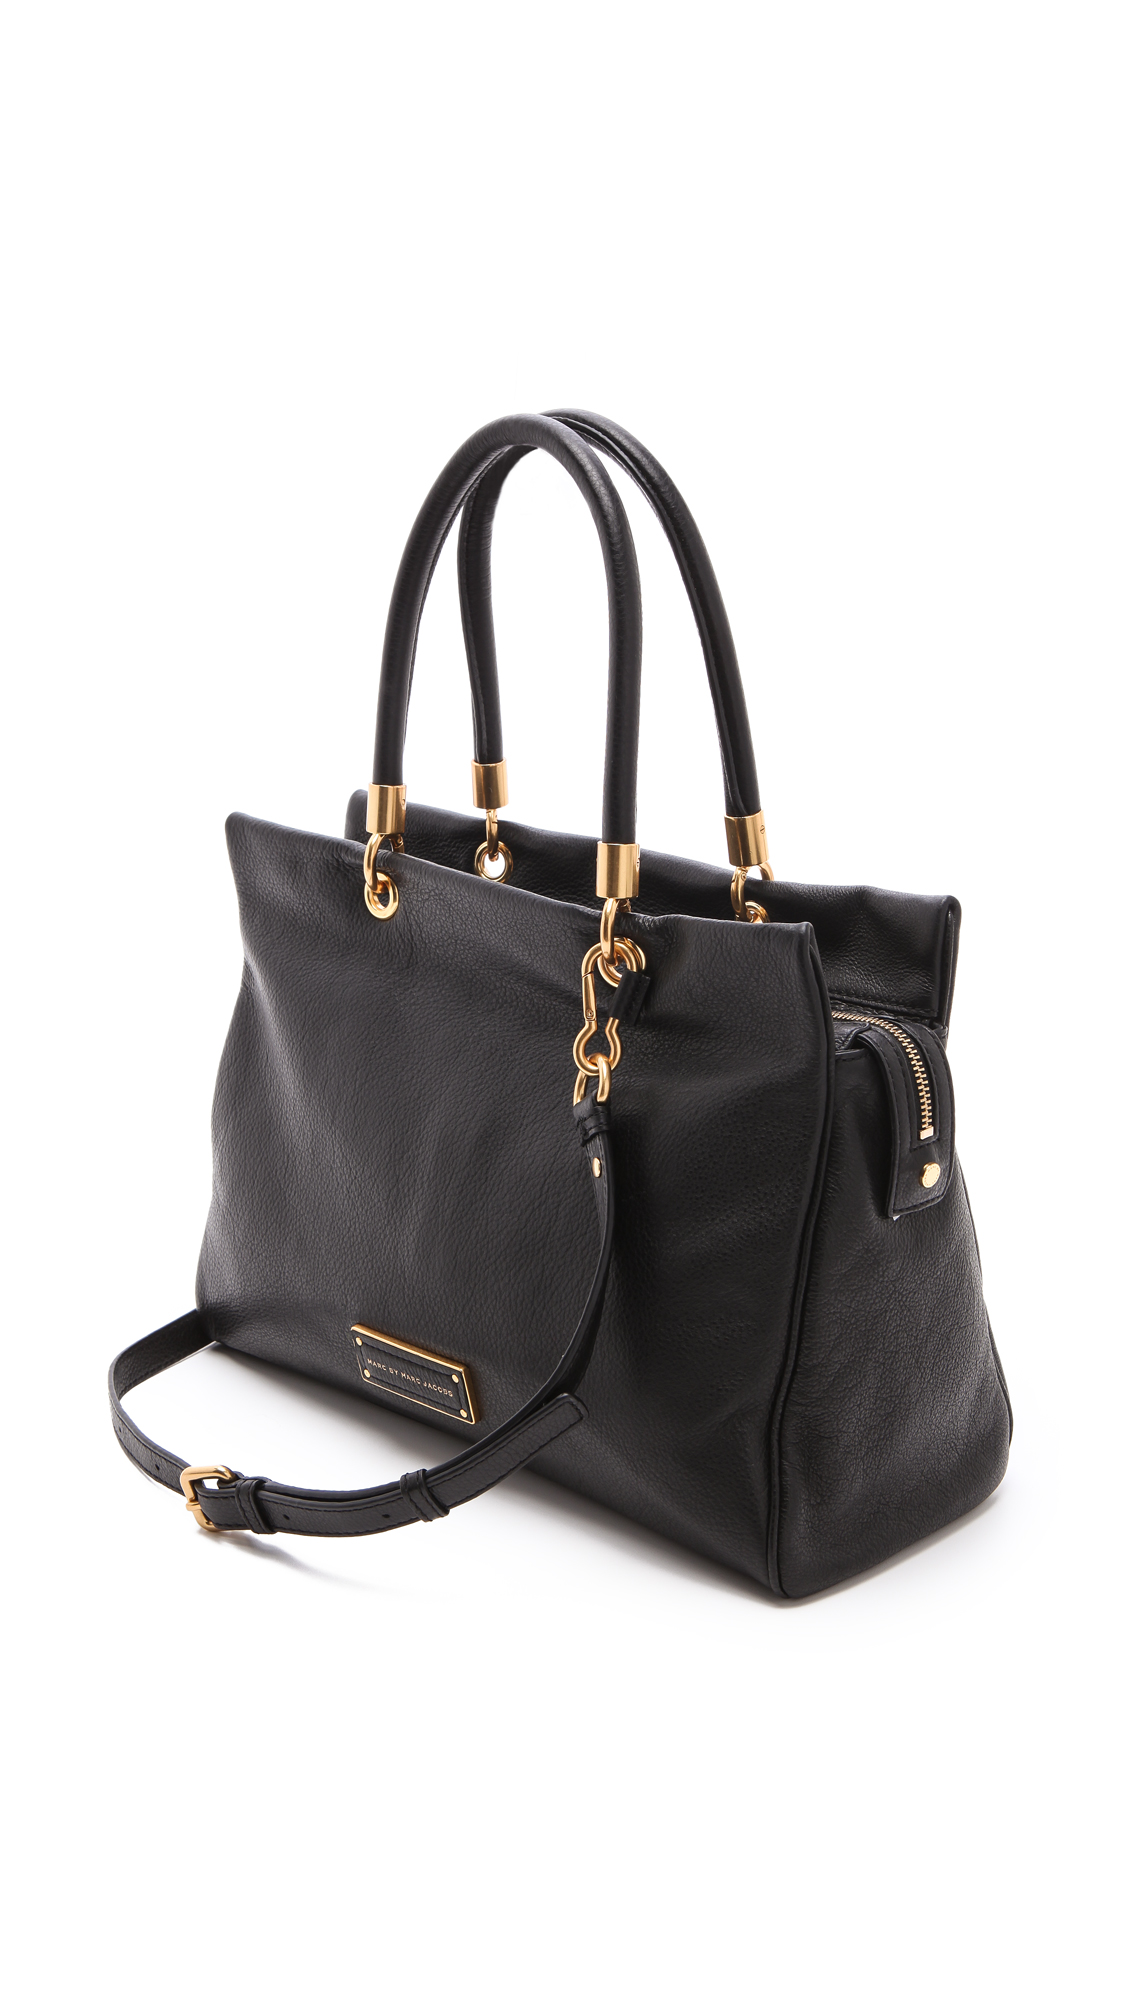 Marc by marc jacobs Too Hot To Handle Tote in Black | Lyst